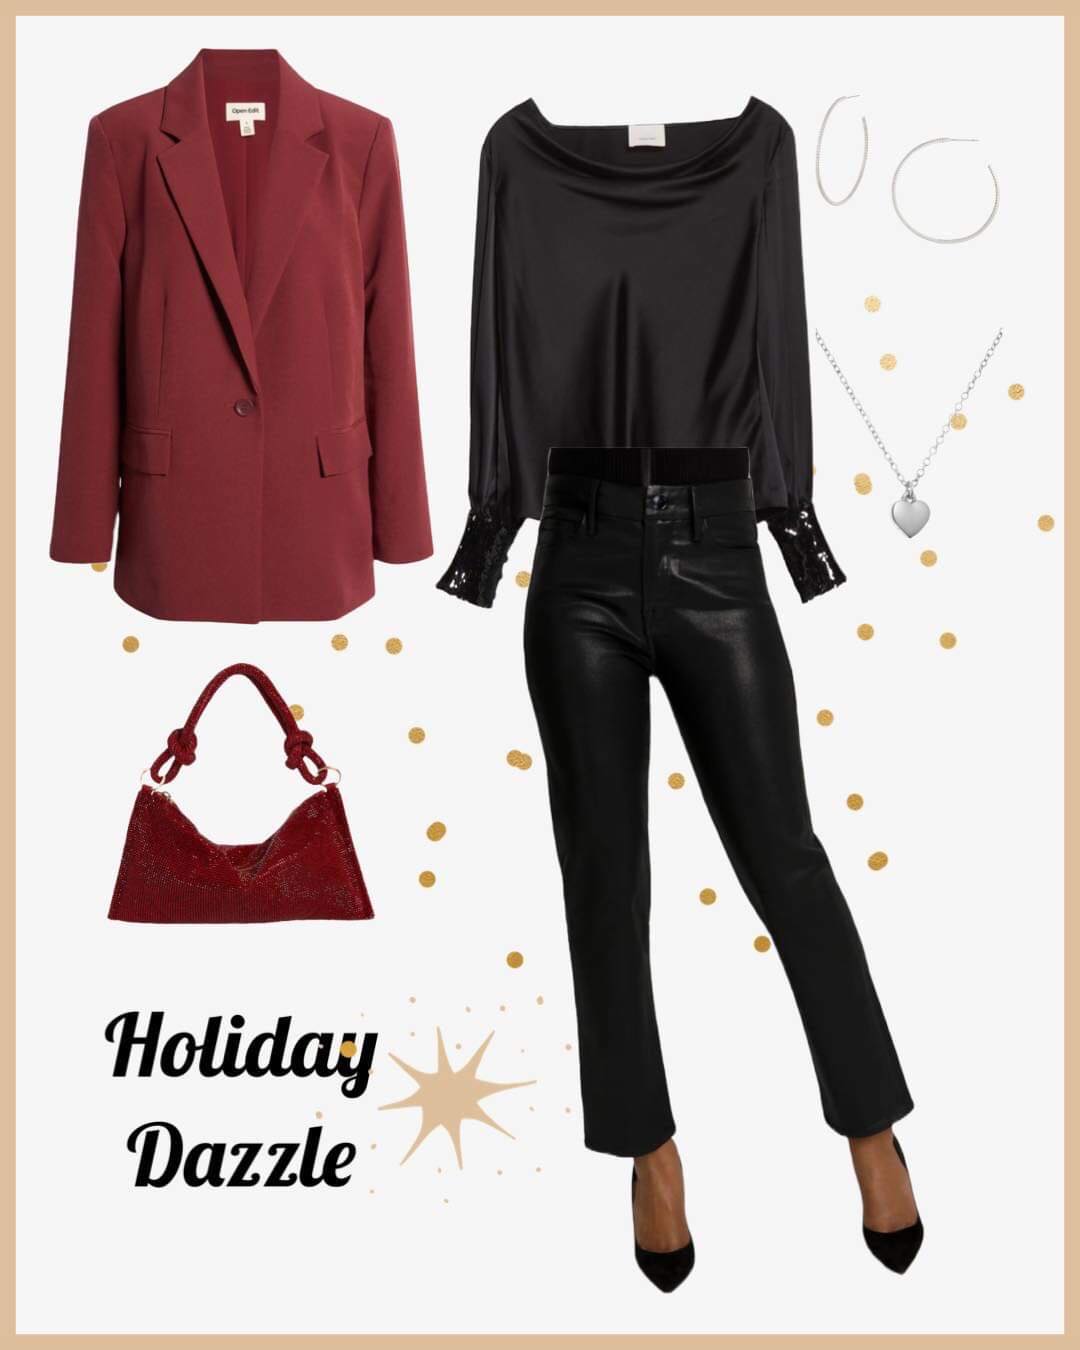 'Tis the Season! - Get Festive with these Holiday Outfit Ideas